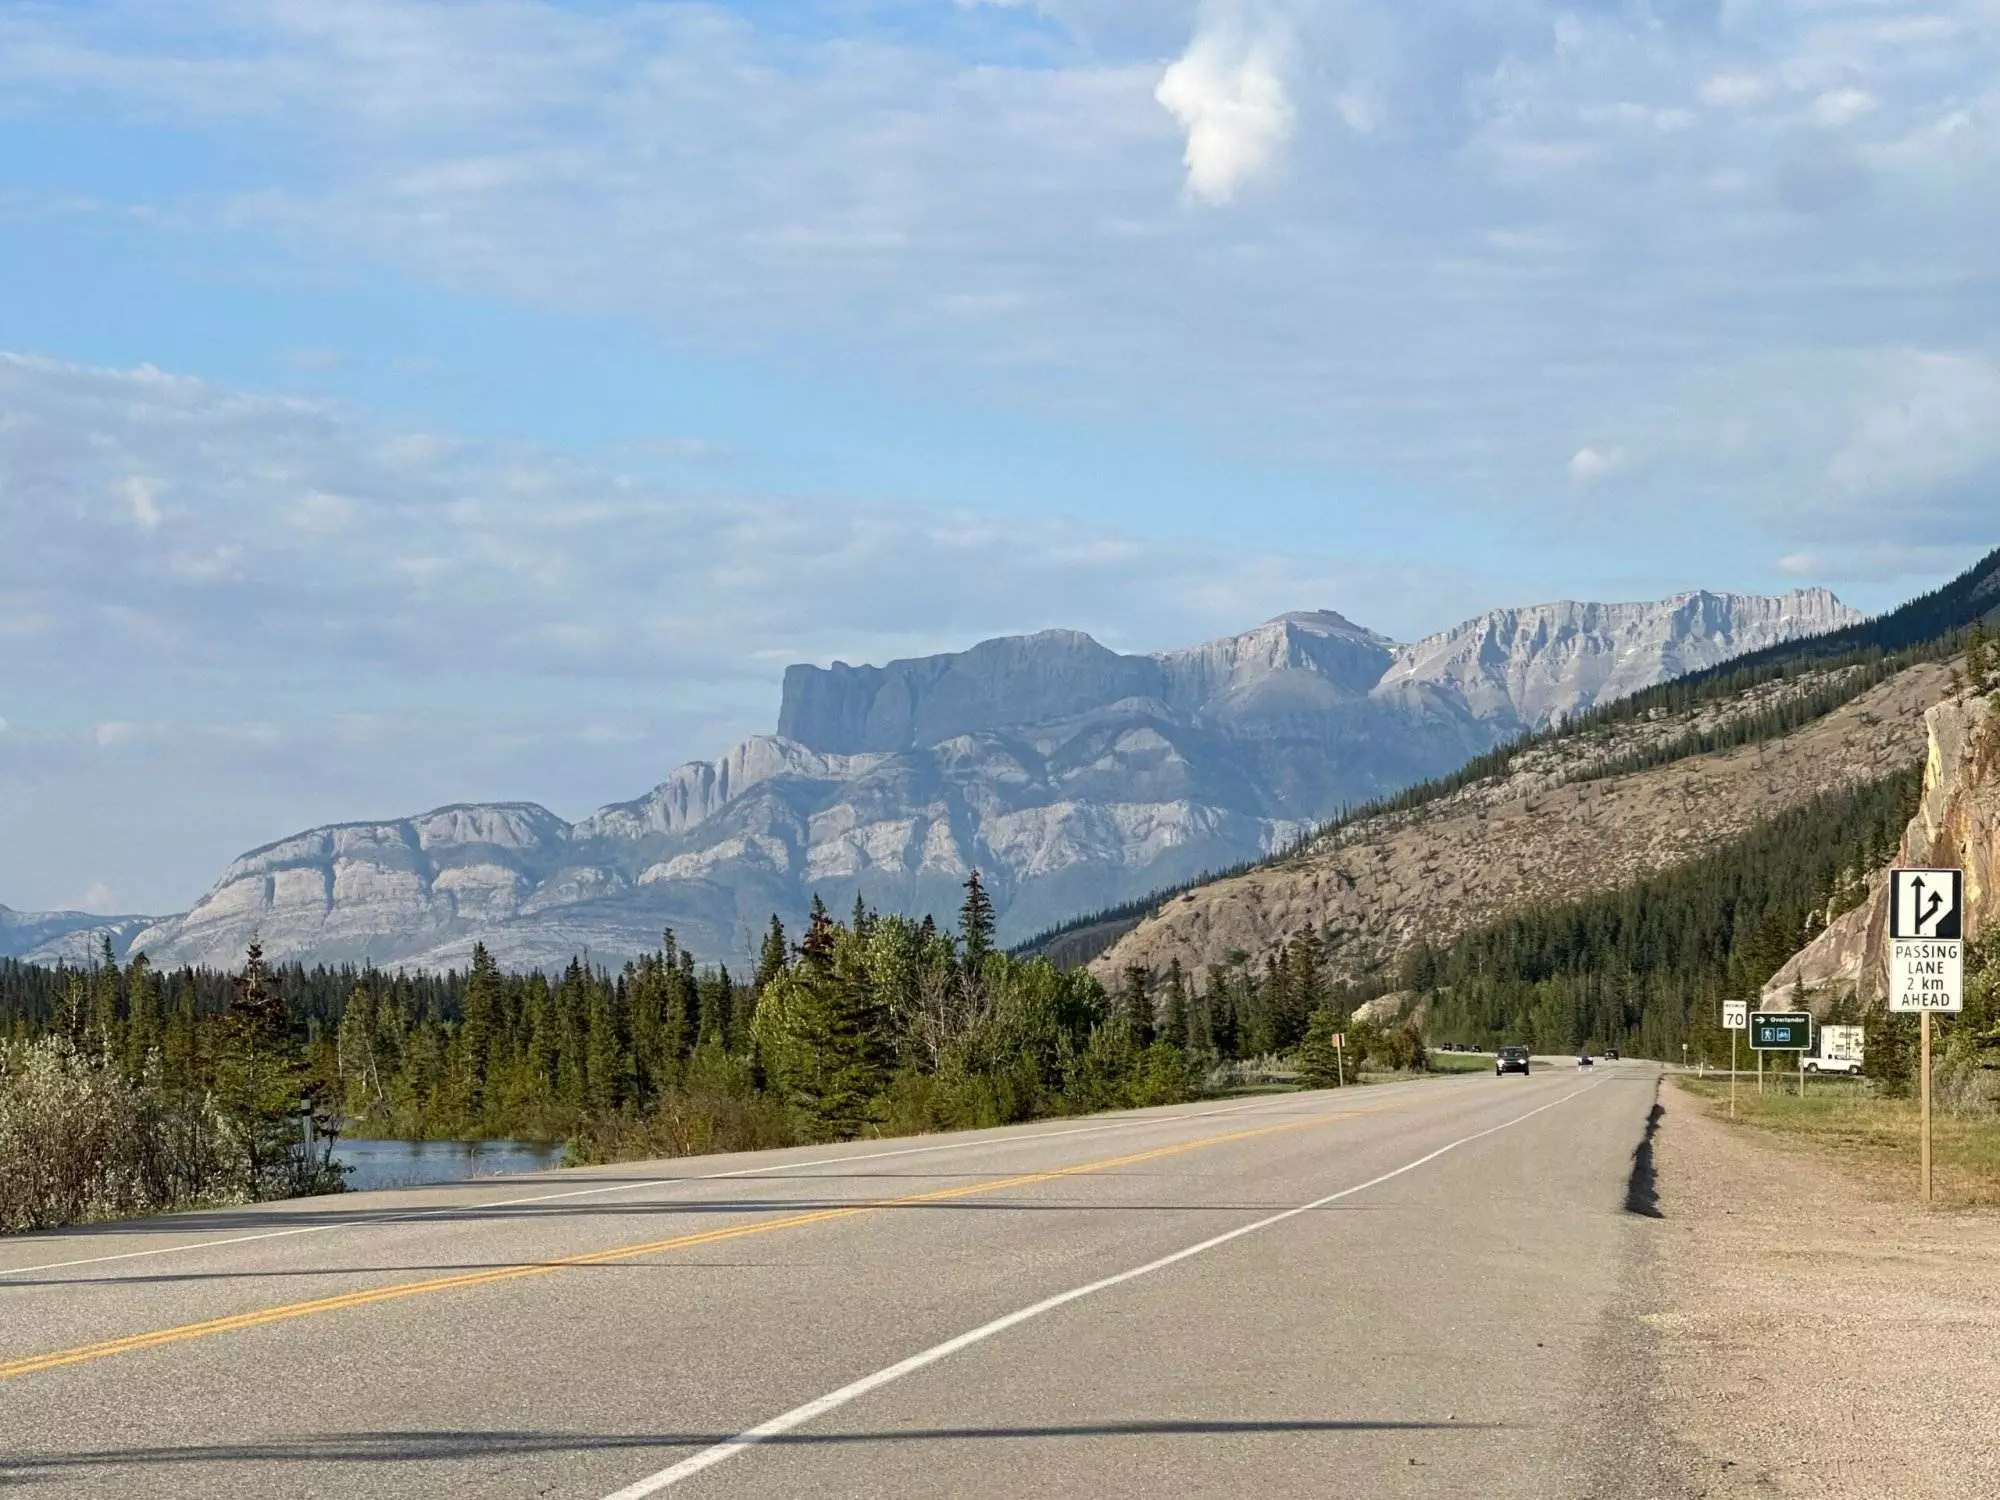 A road beside the mountains in the Banff National Park